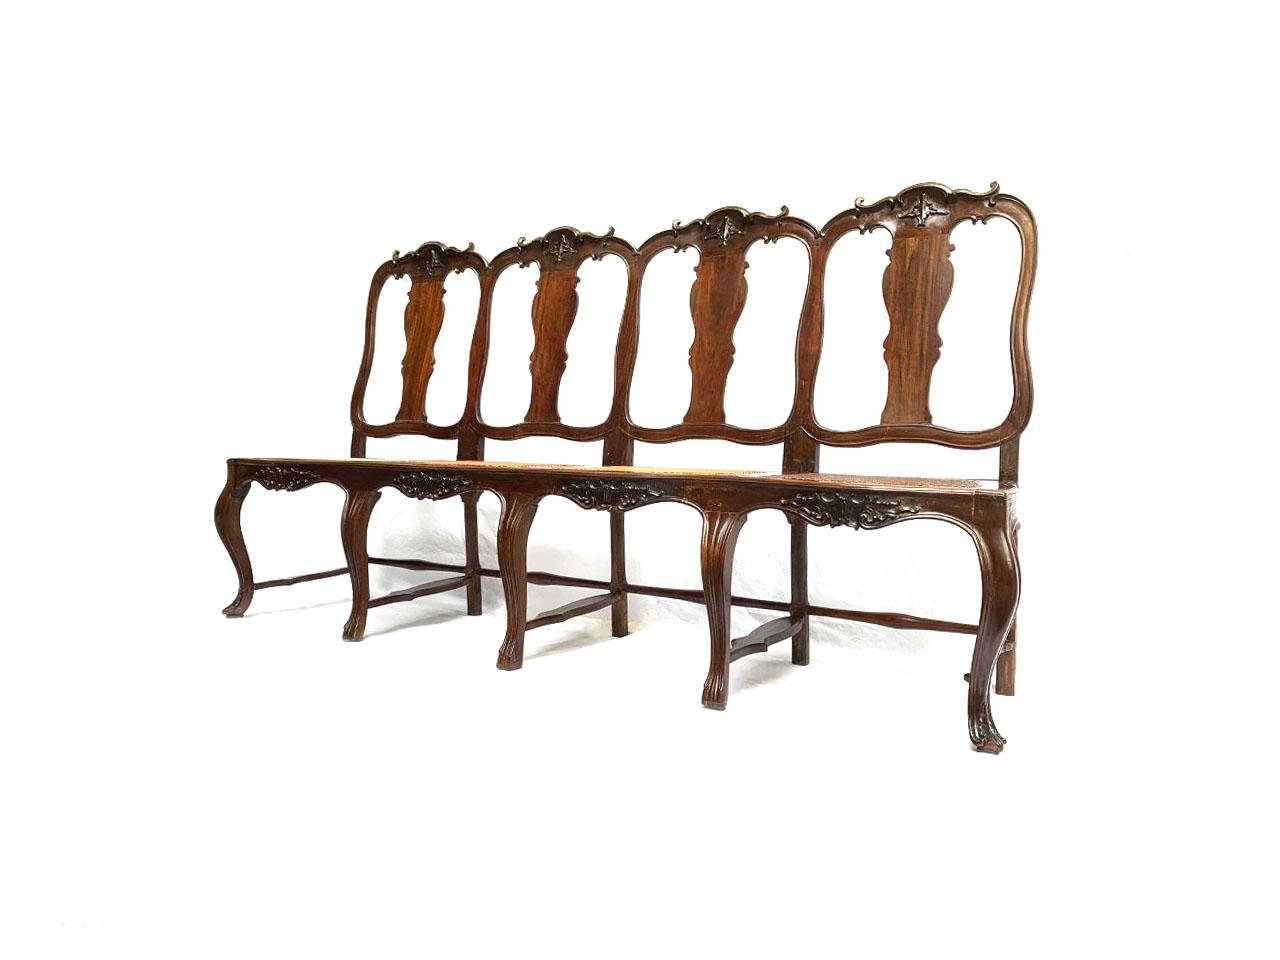 Magnificent 18th Century South American Colonial Escaño Settee in light wood 
Backrest formed by four 